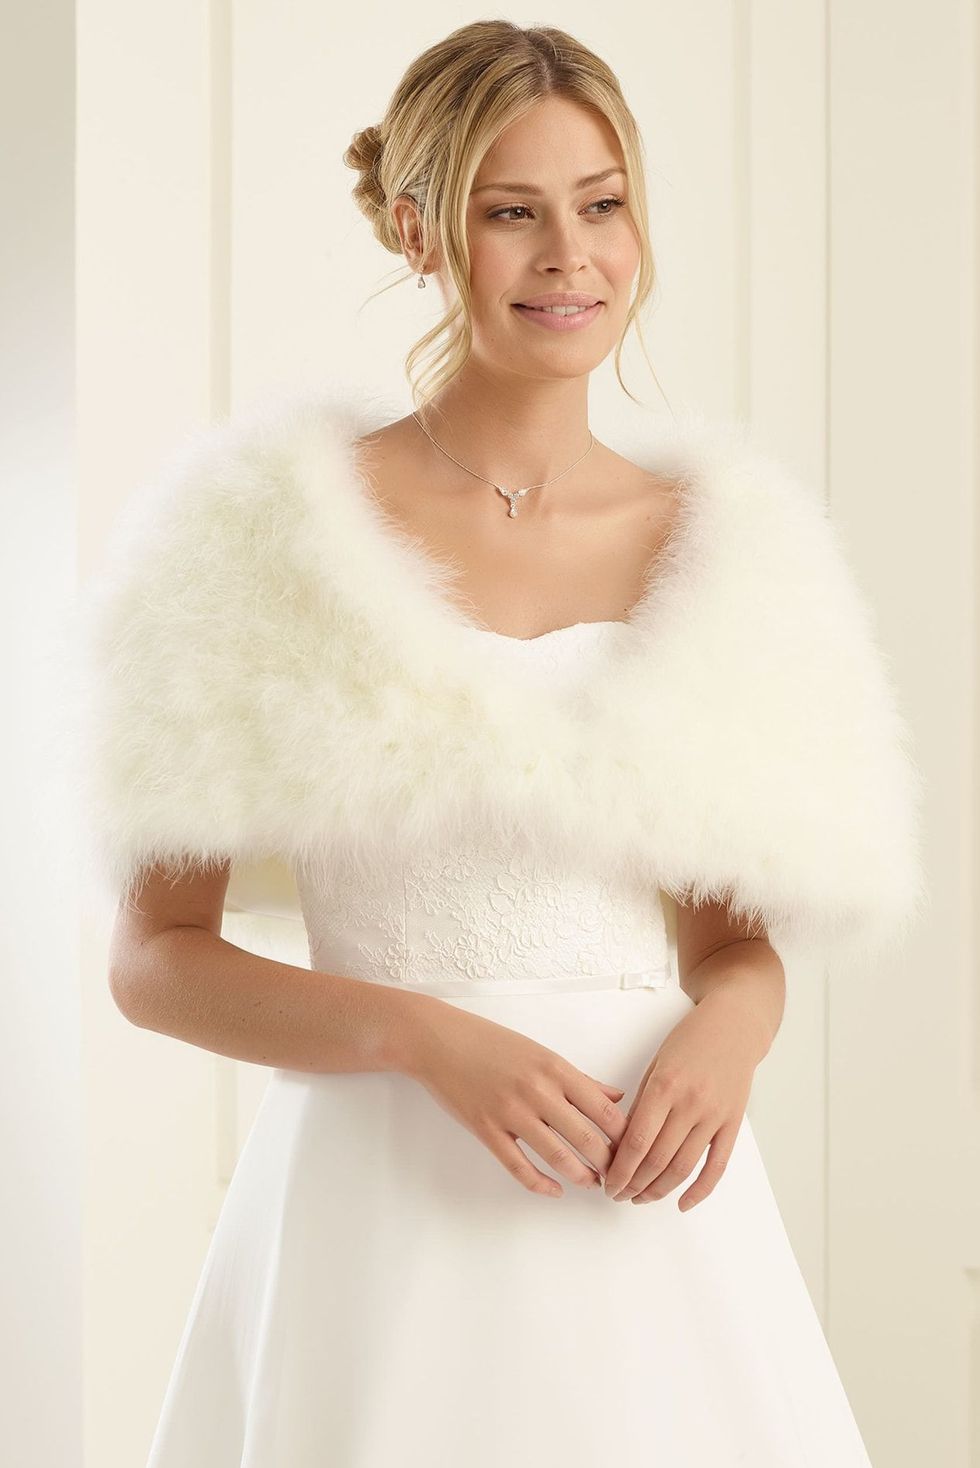 Wedding cape marabou feather cover-up